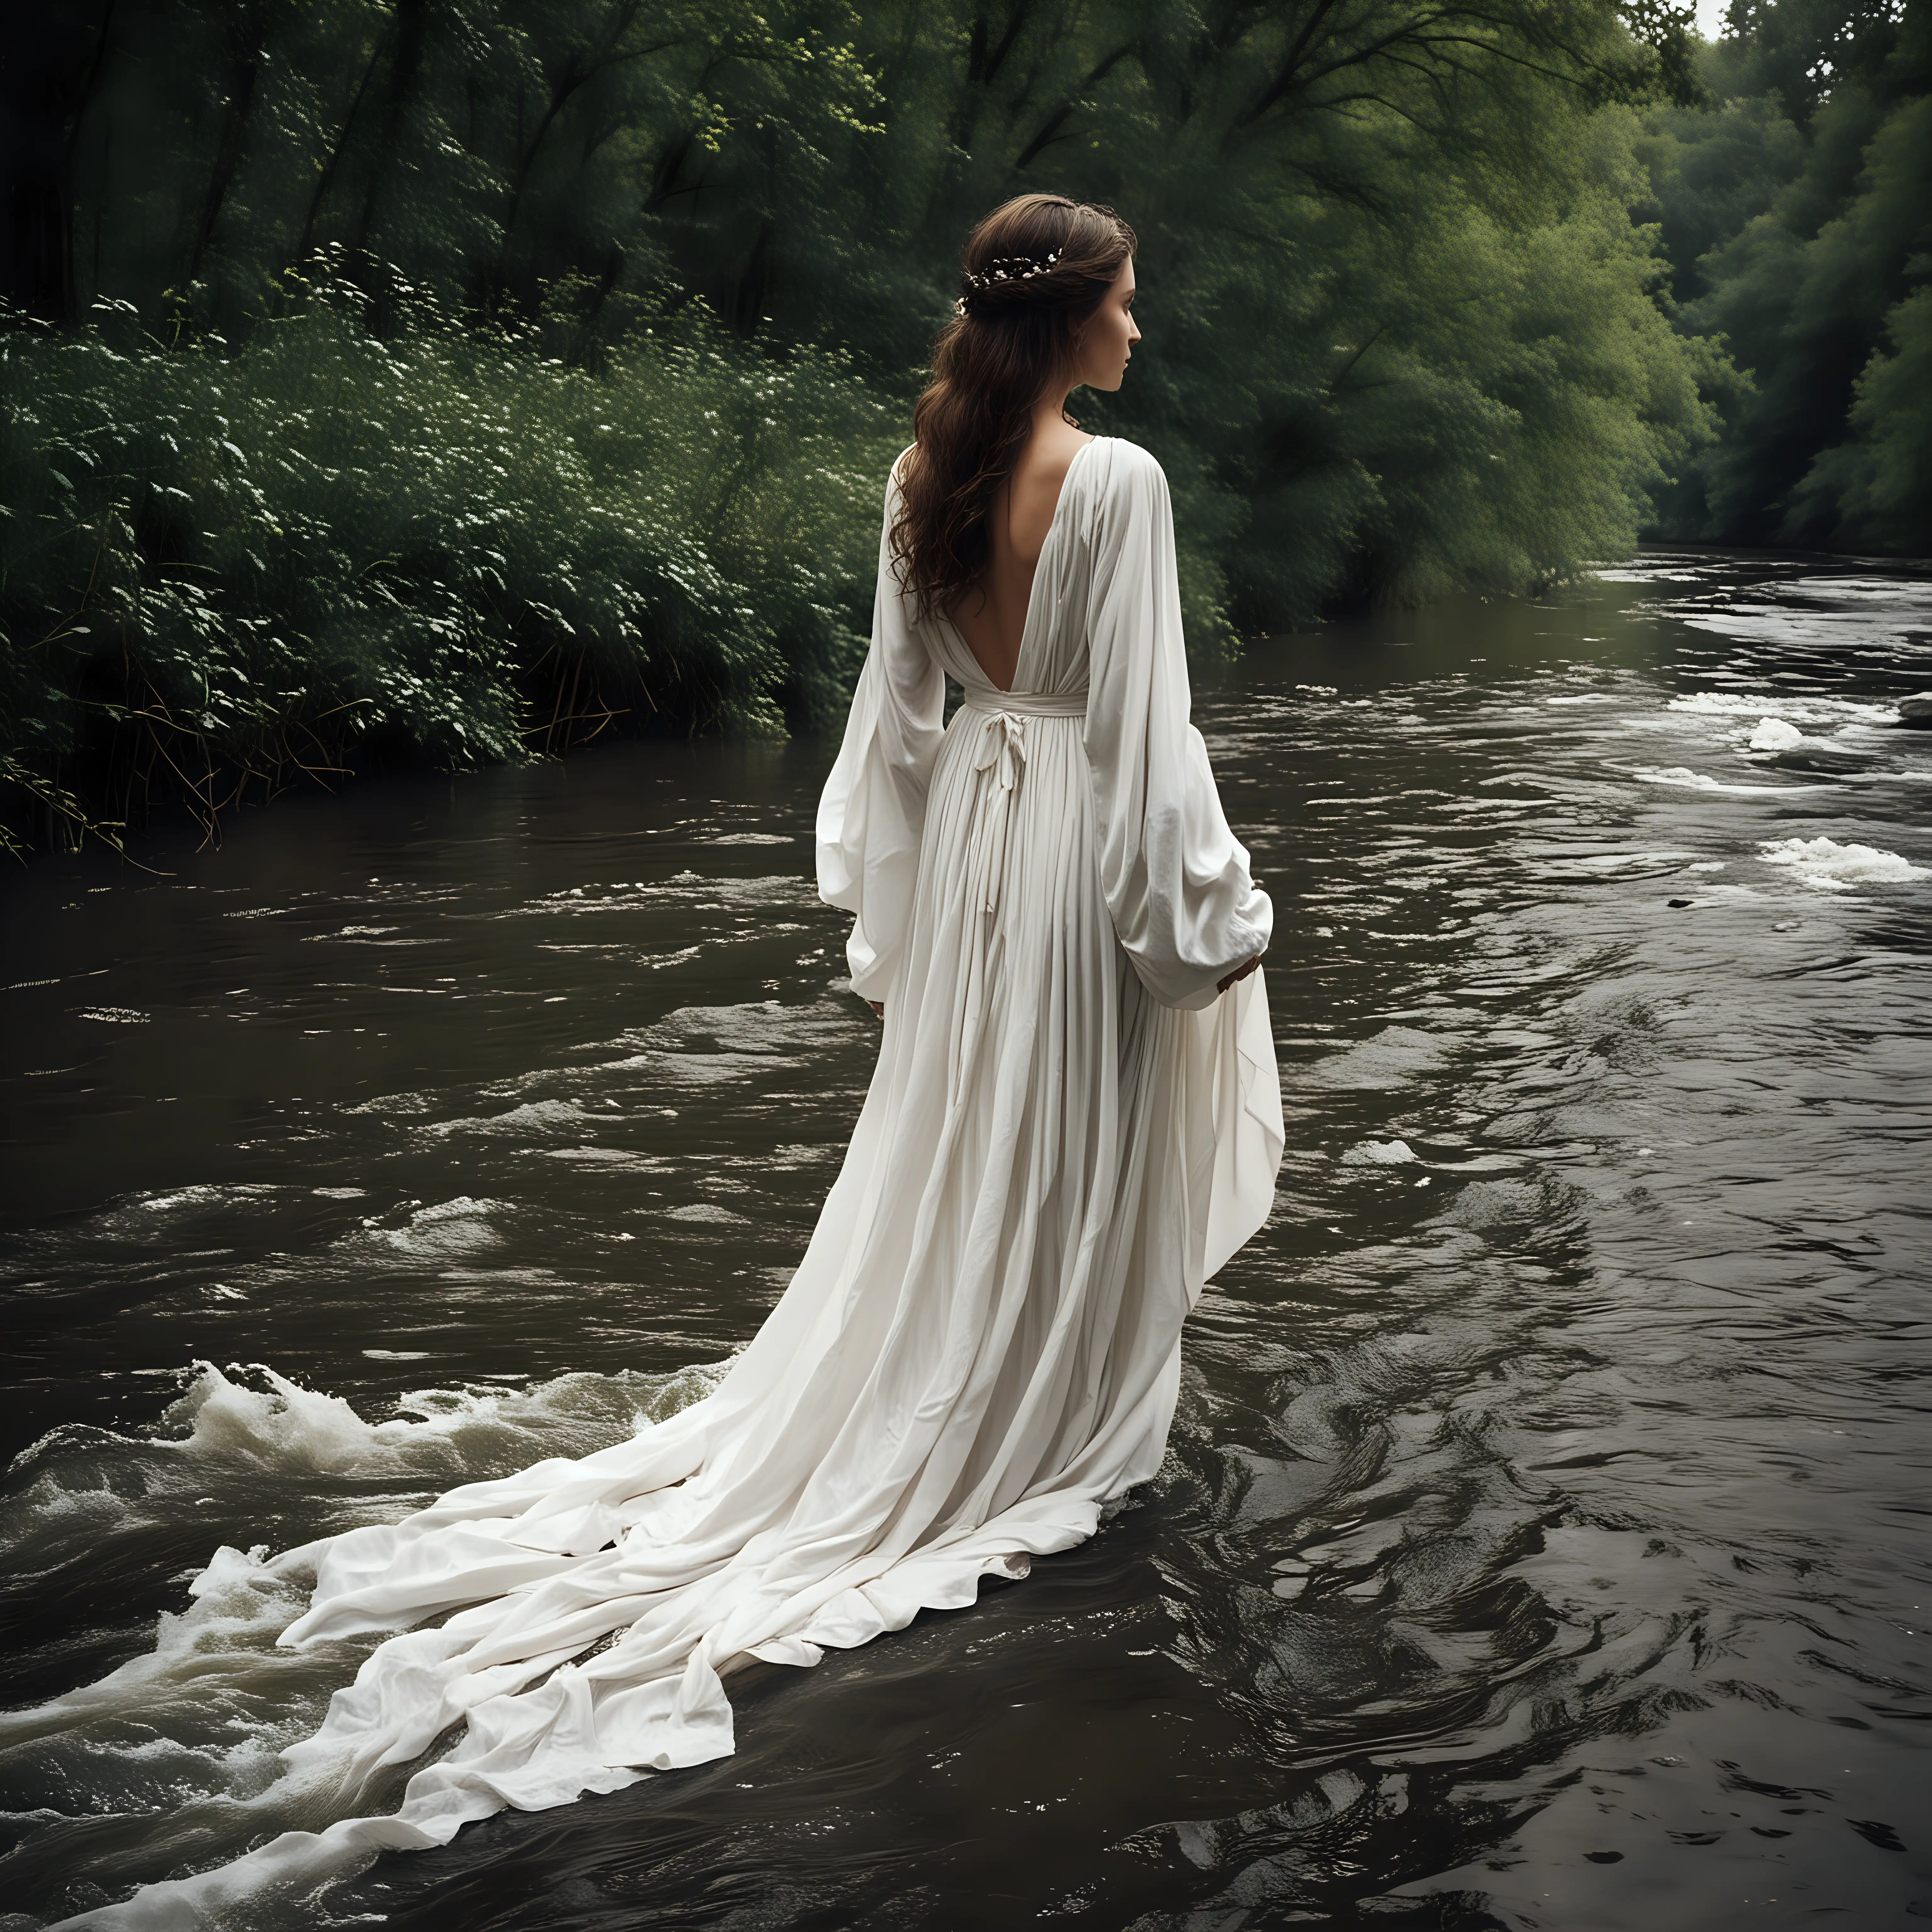 Enchanting-River-Maiden-Lures-Wanderers-with-Bewitching-Gaze